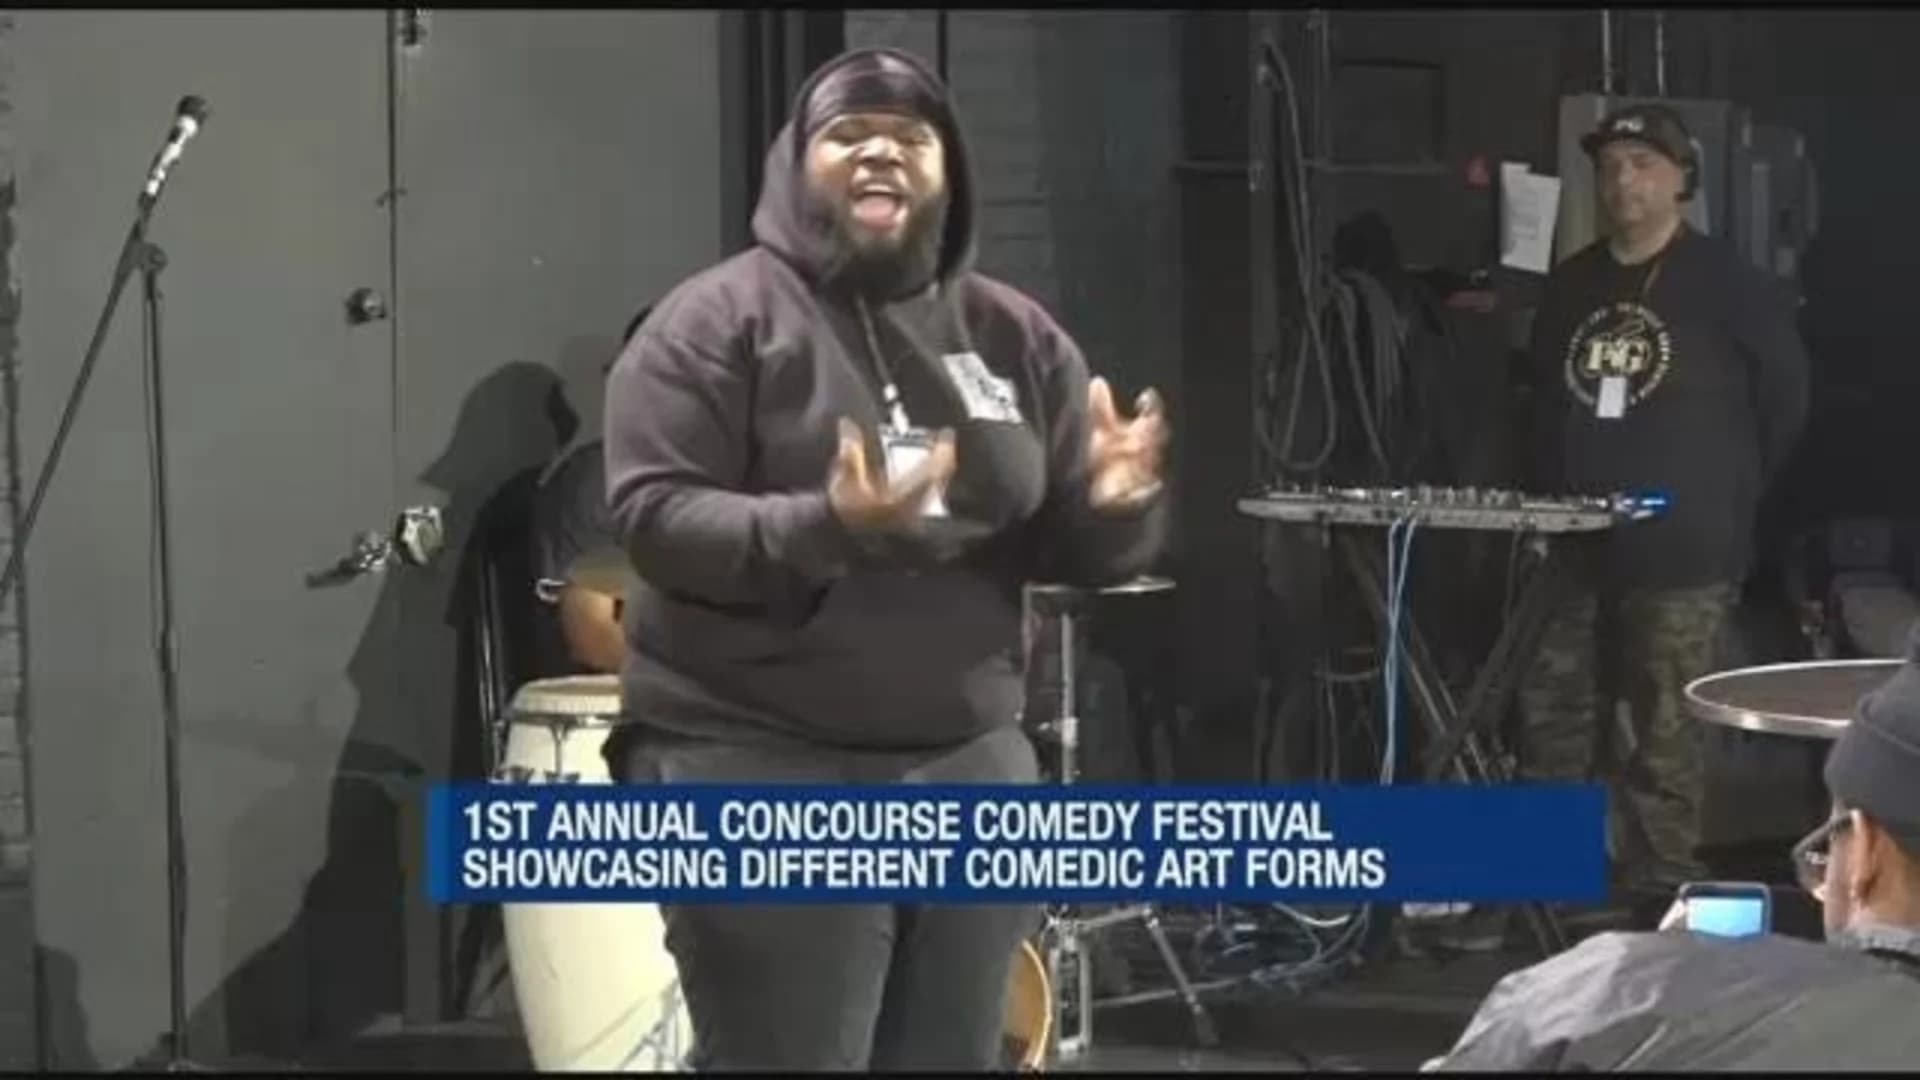 Concourse Comedy Festival brings the funny to Hunts Point